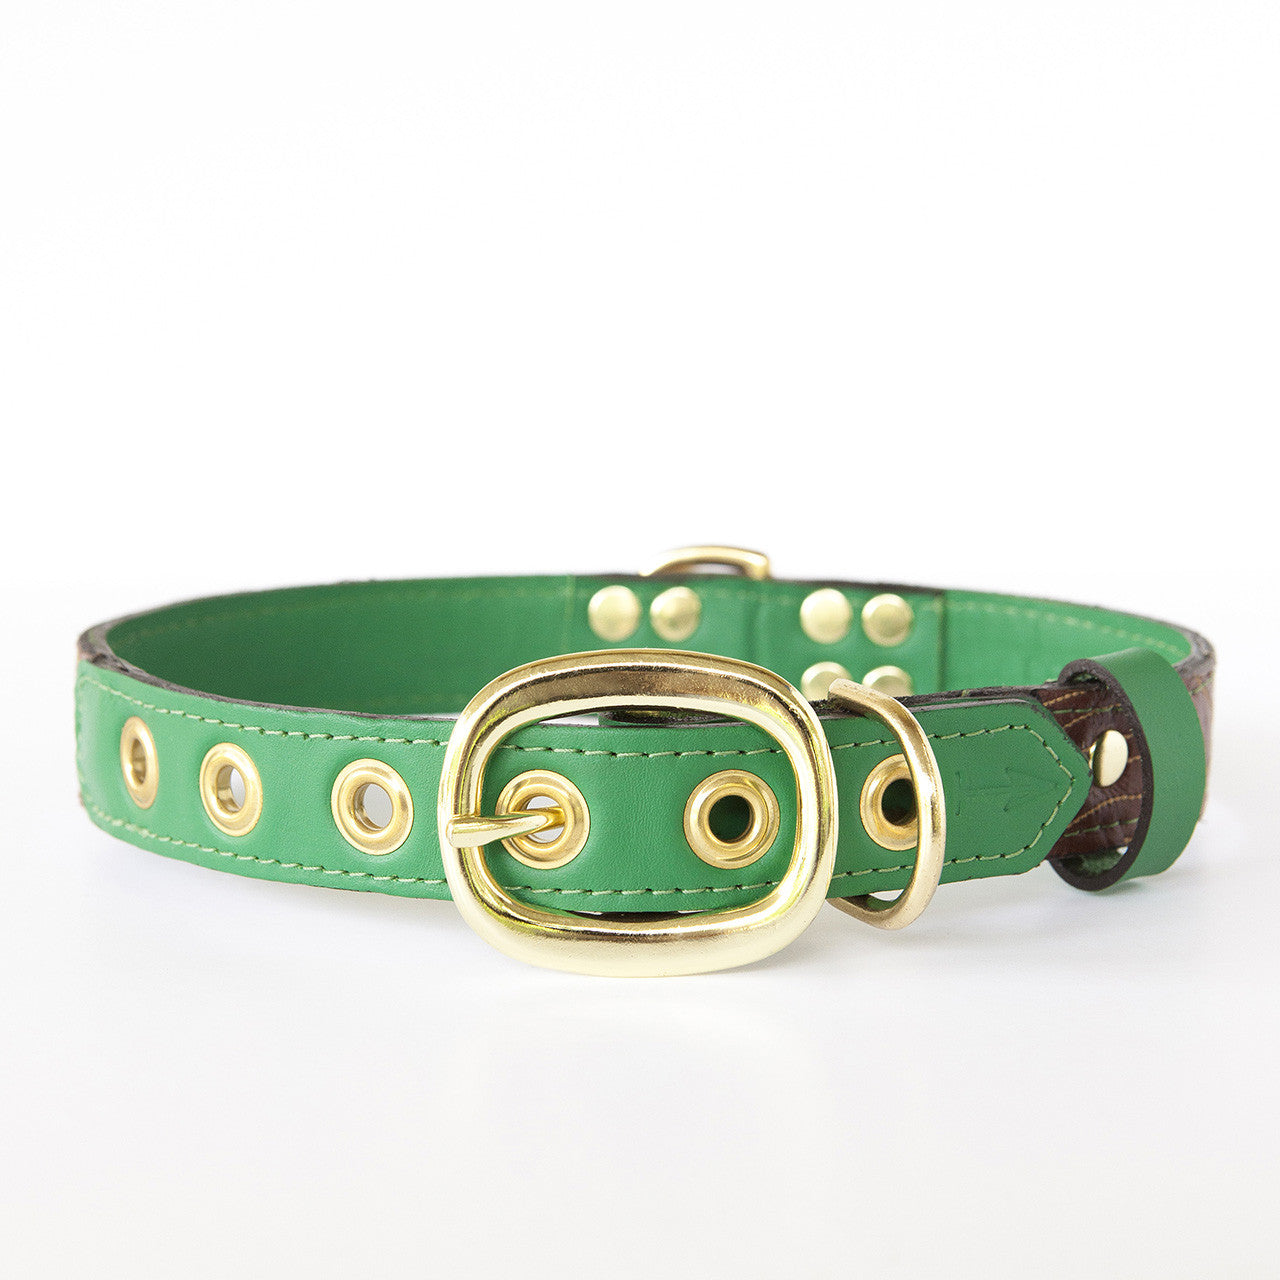 Emerald Green Dog Collar with Brown Leather + Tan Stitching (back view)